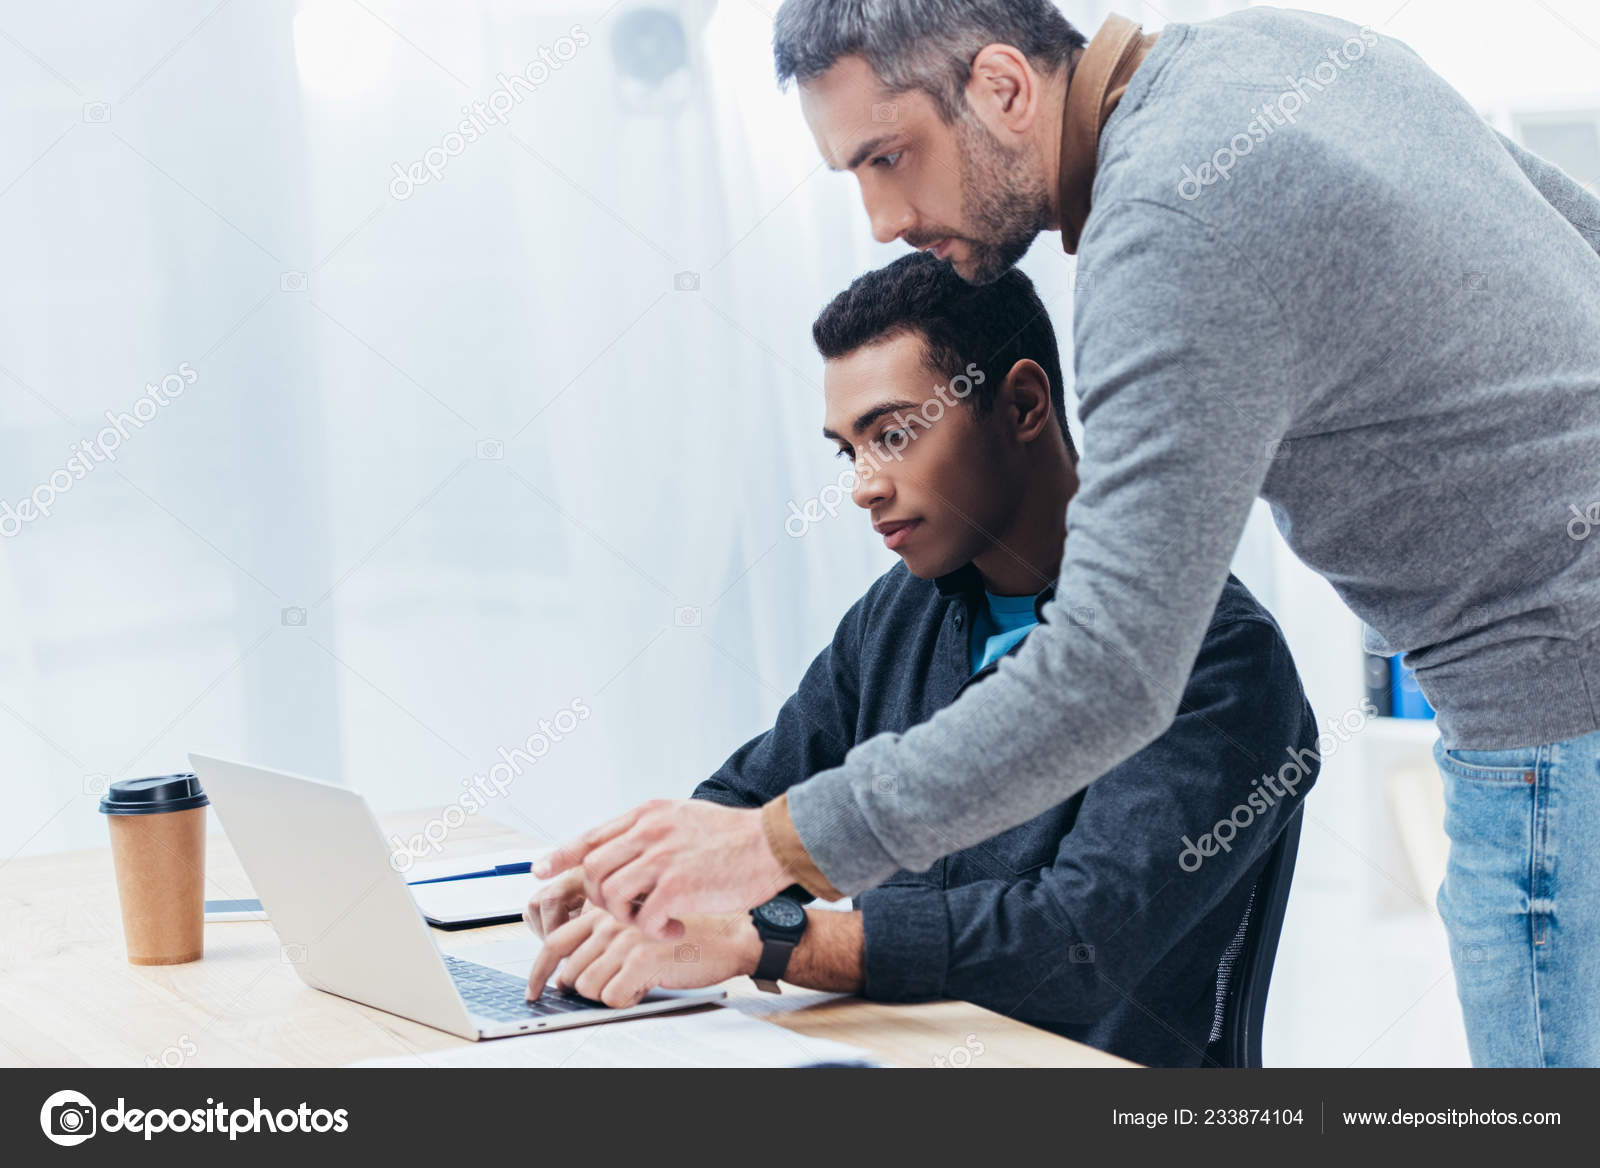 midt i intetsteds Bluebell loop Bearded Mentor Helping Young Colleague Working Laptop Office Stock Photo by  ©AllaSerebrina 233874104